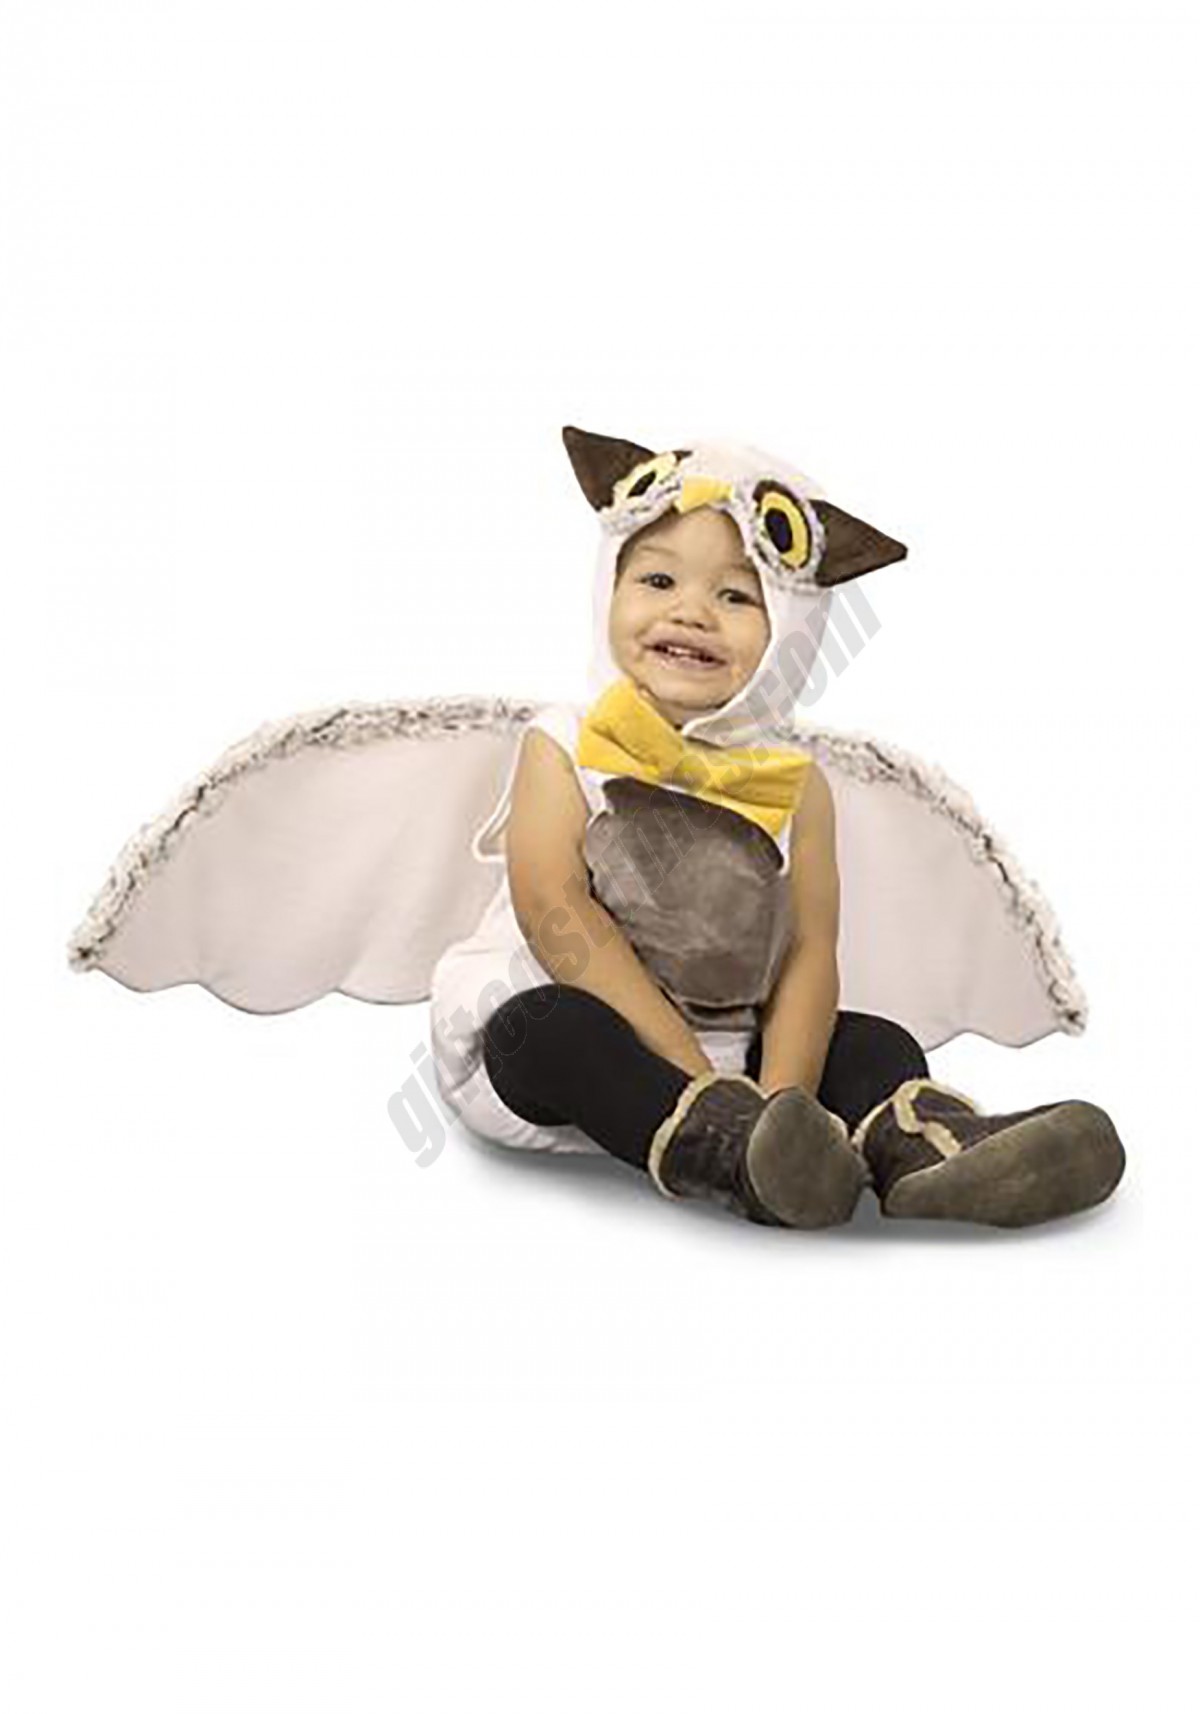 Otis the Owl Costume for Toddlers Promotions - -1